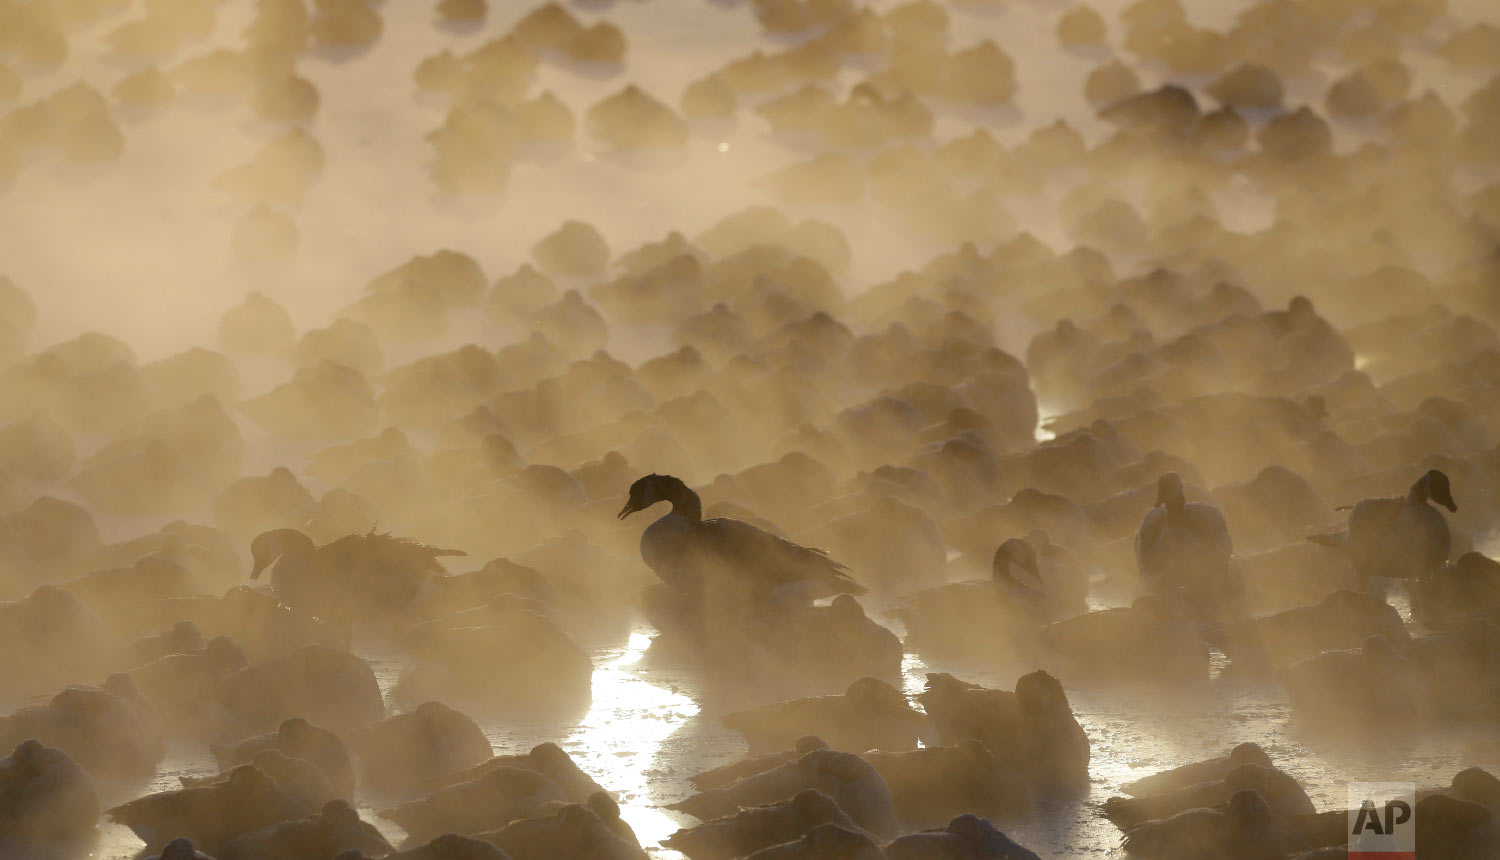  Geese huddle in the water as the sun rises at the harbor in Port Washington, Wis., on Wednesday, Jan. 30, 2019.  (AP Photo/Jeffrey Phelps) 